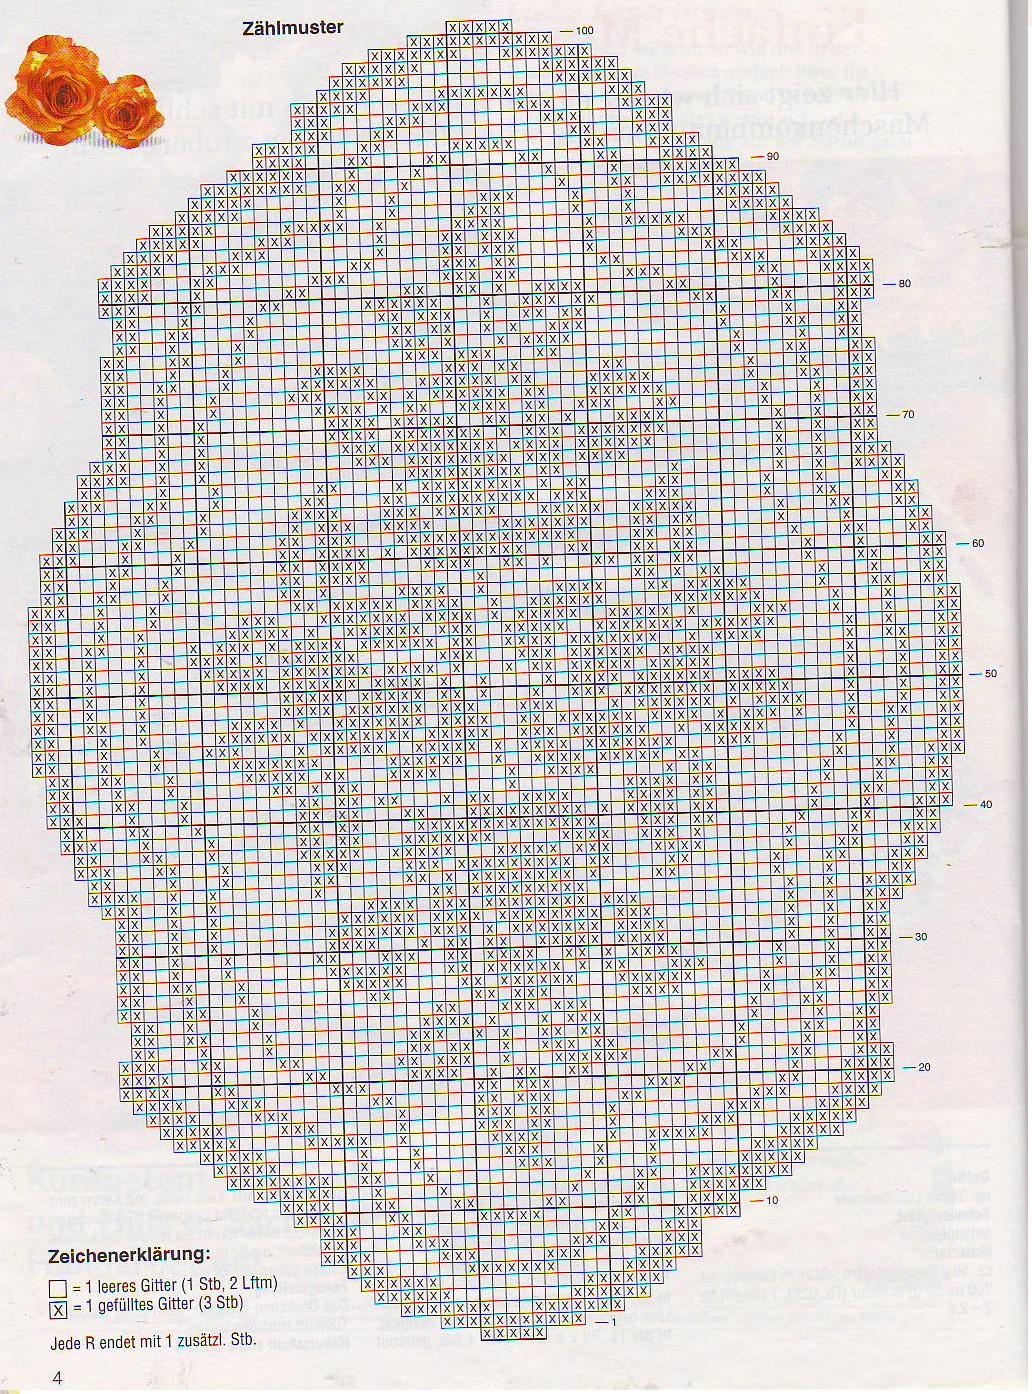 Oval doily filet with a branch of roses (2)